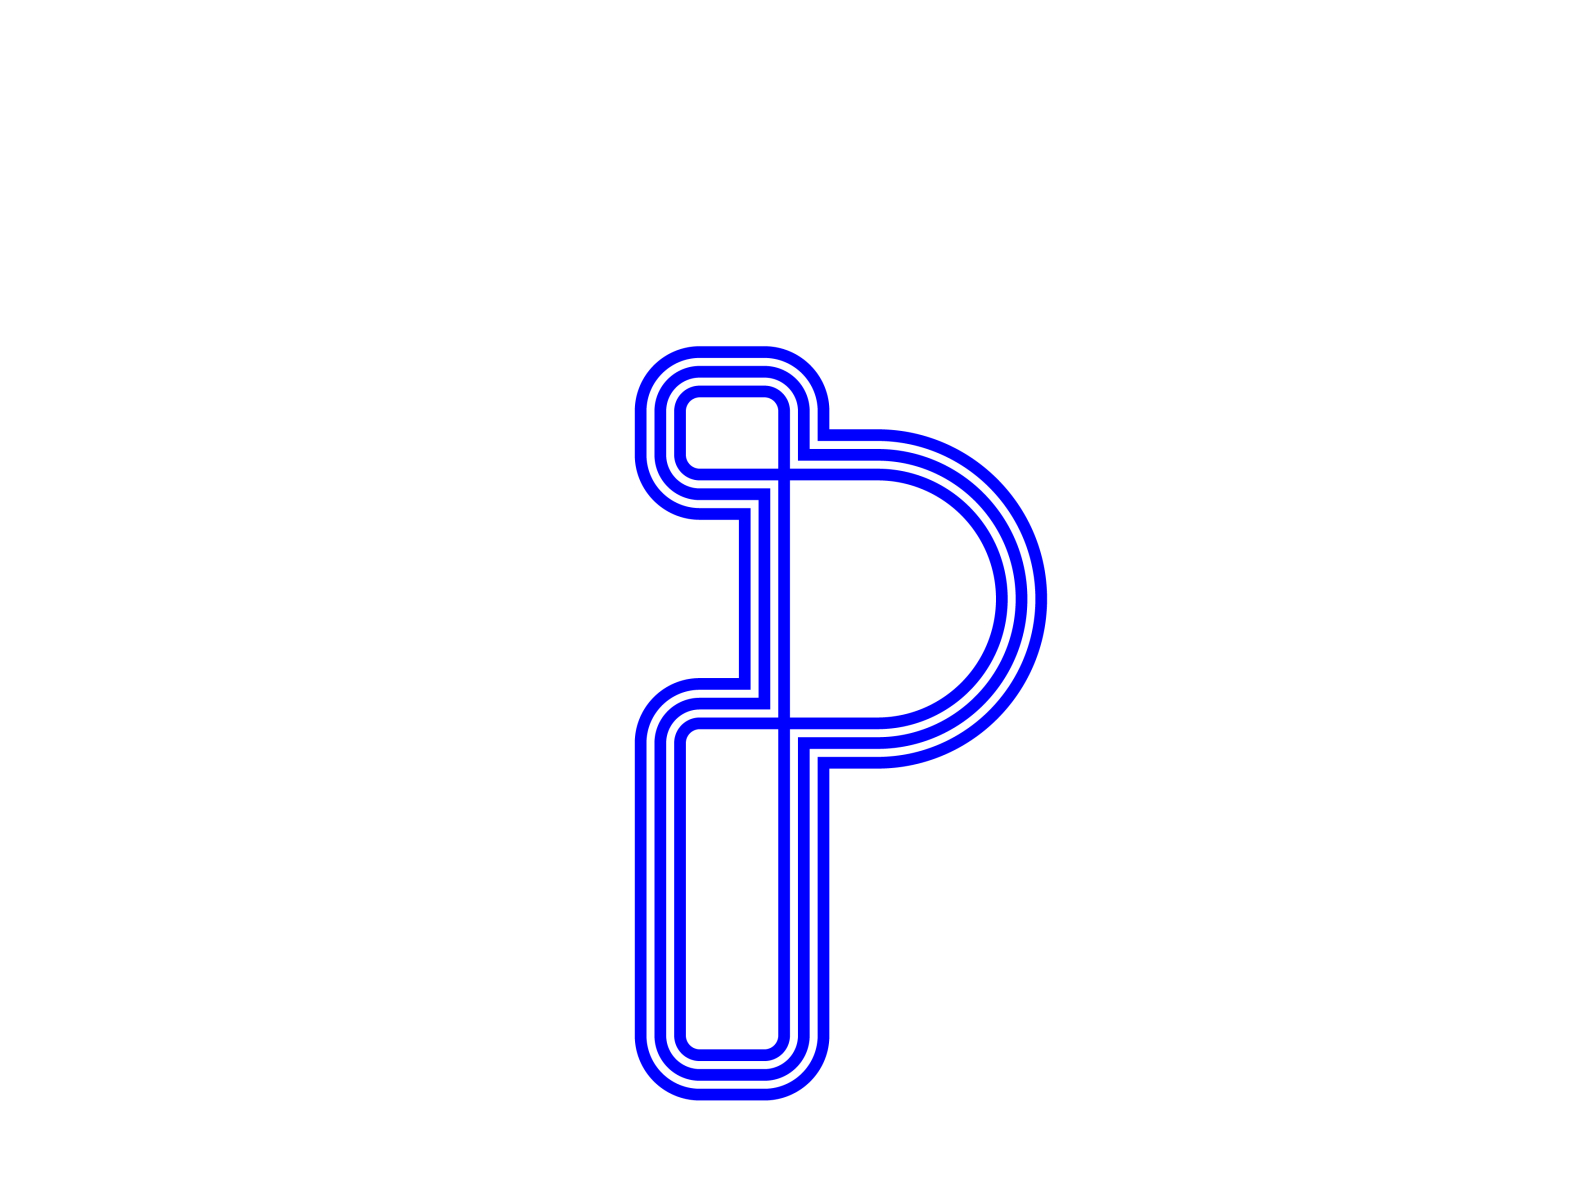 Letter I + P logo by Imamul Muttaqin on Dribbble